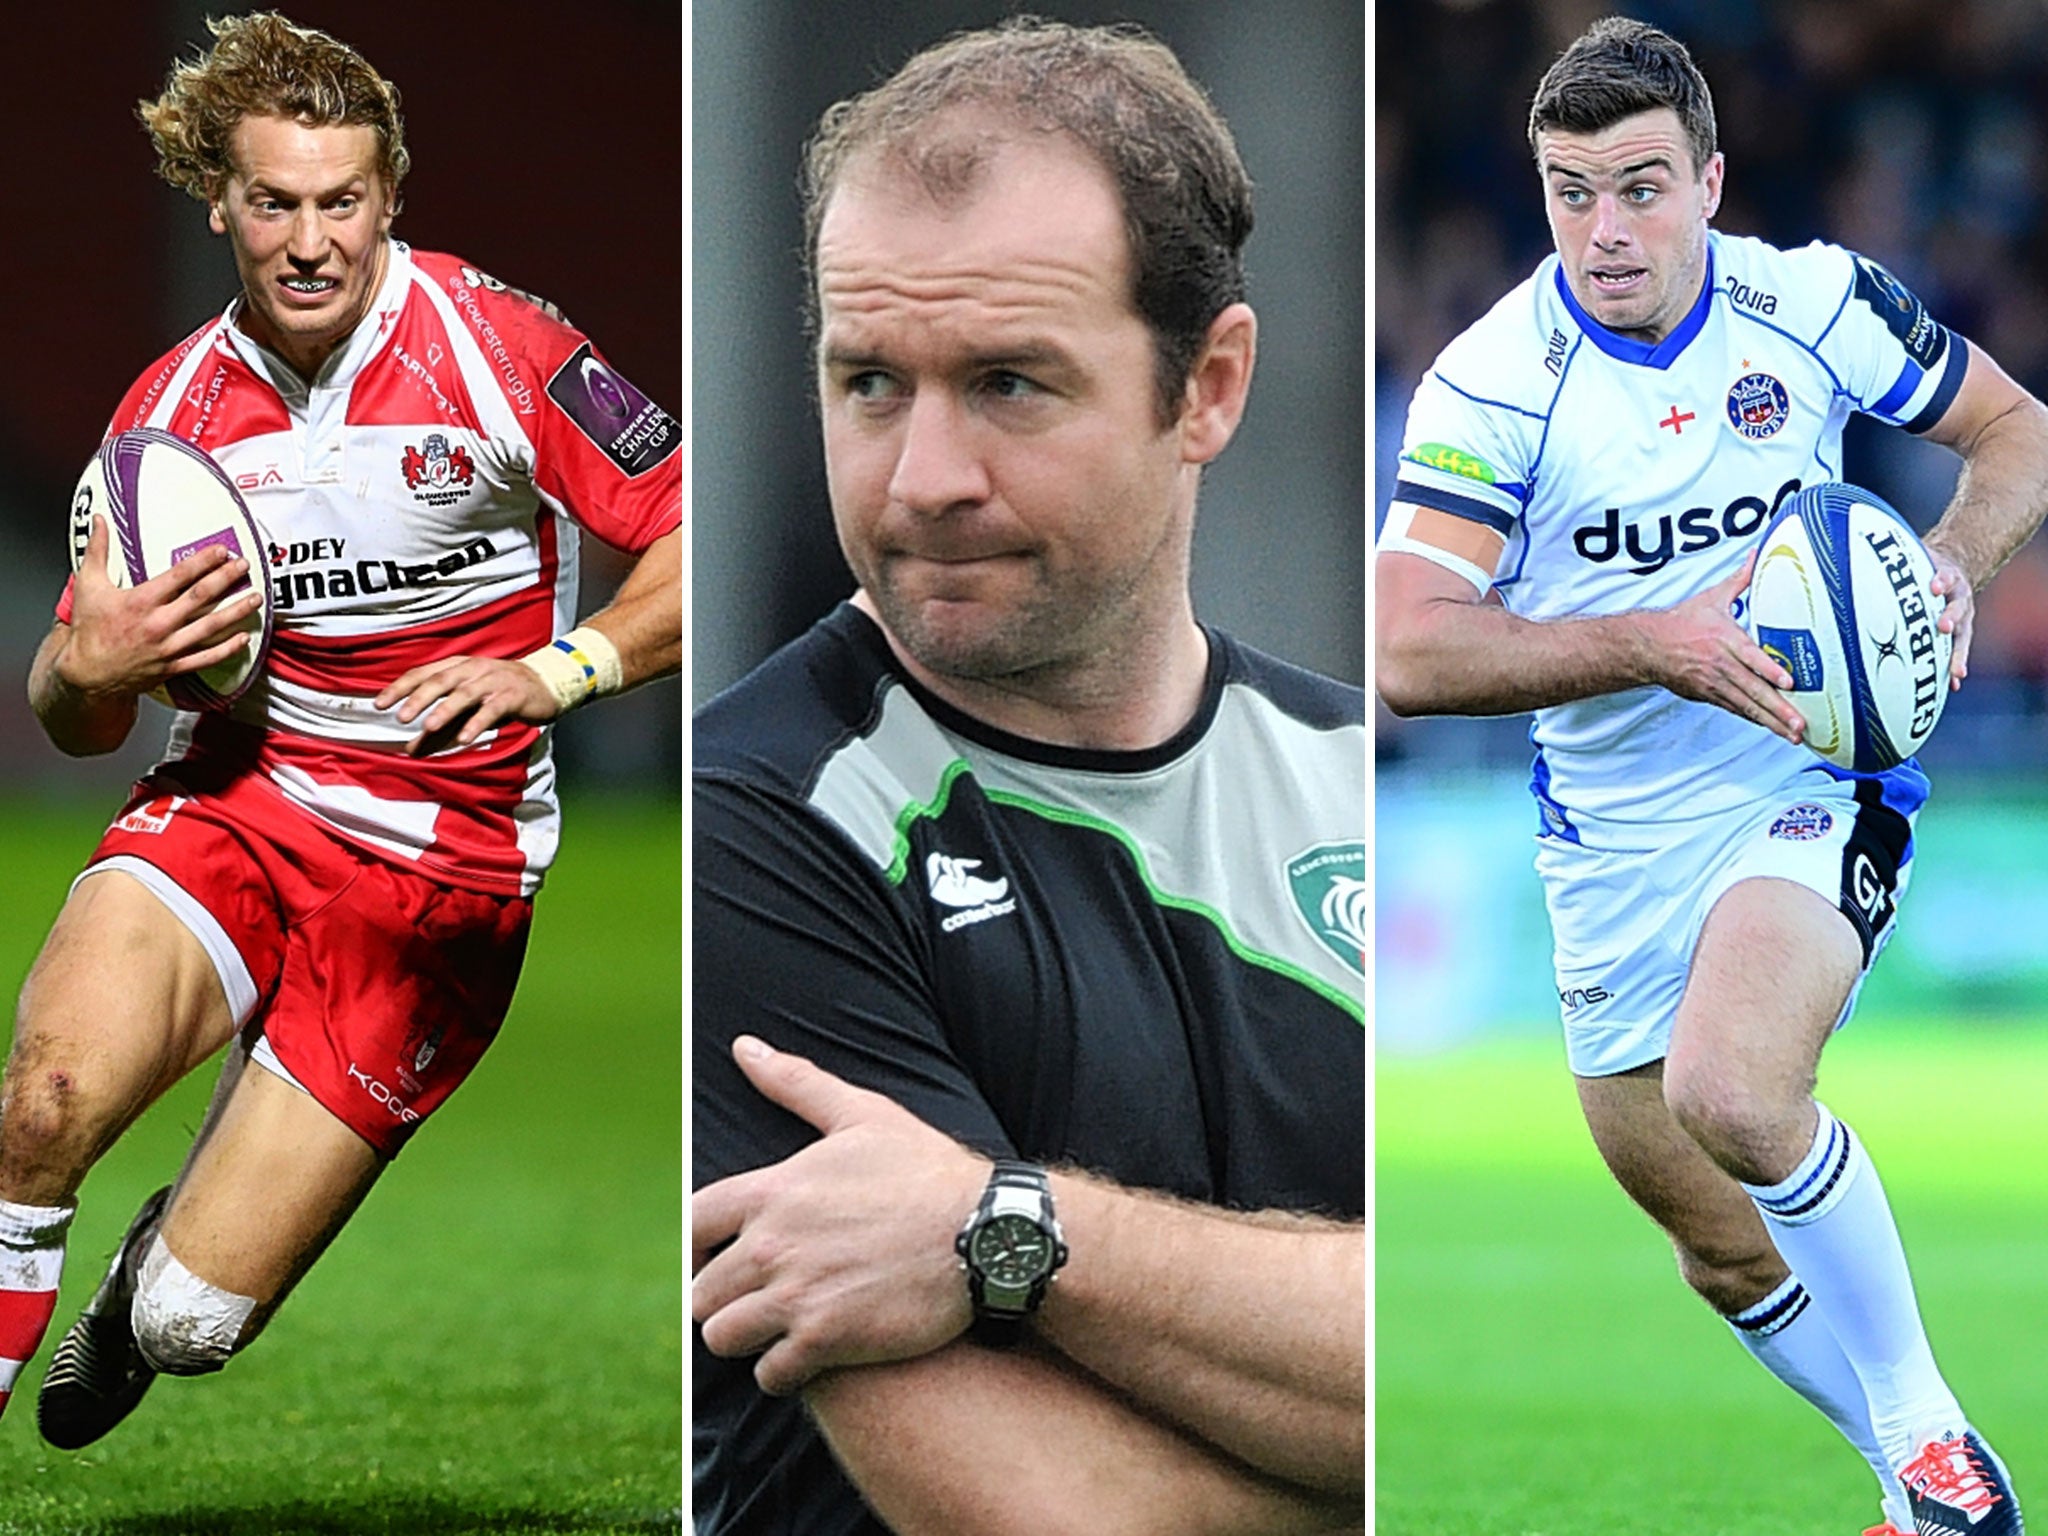 Break away: The loss of Billy Twelvetrees and George Ford is ‘all tied to the salary cap’, says Geordan Murphy (centre)